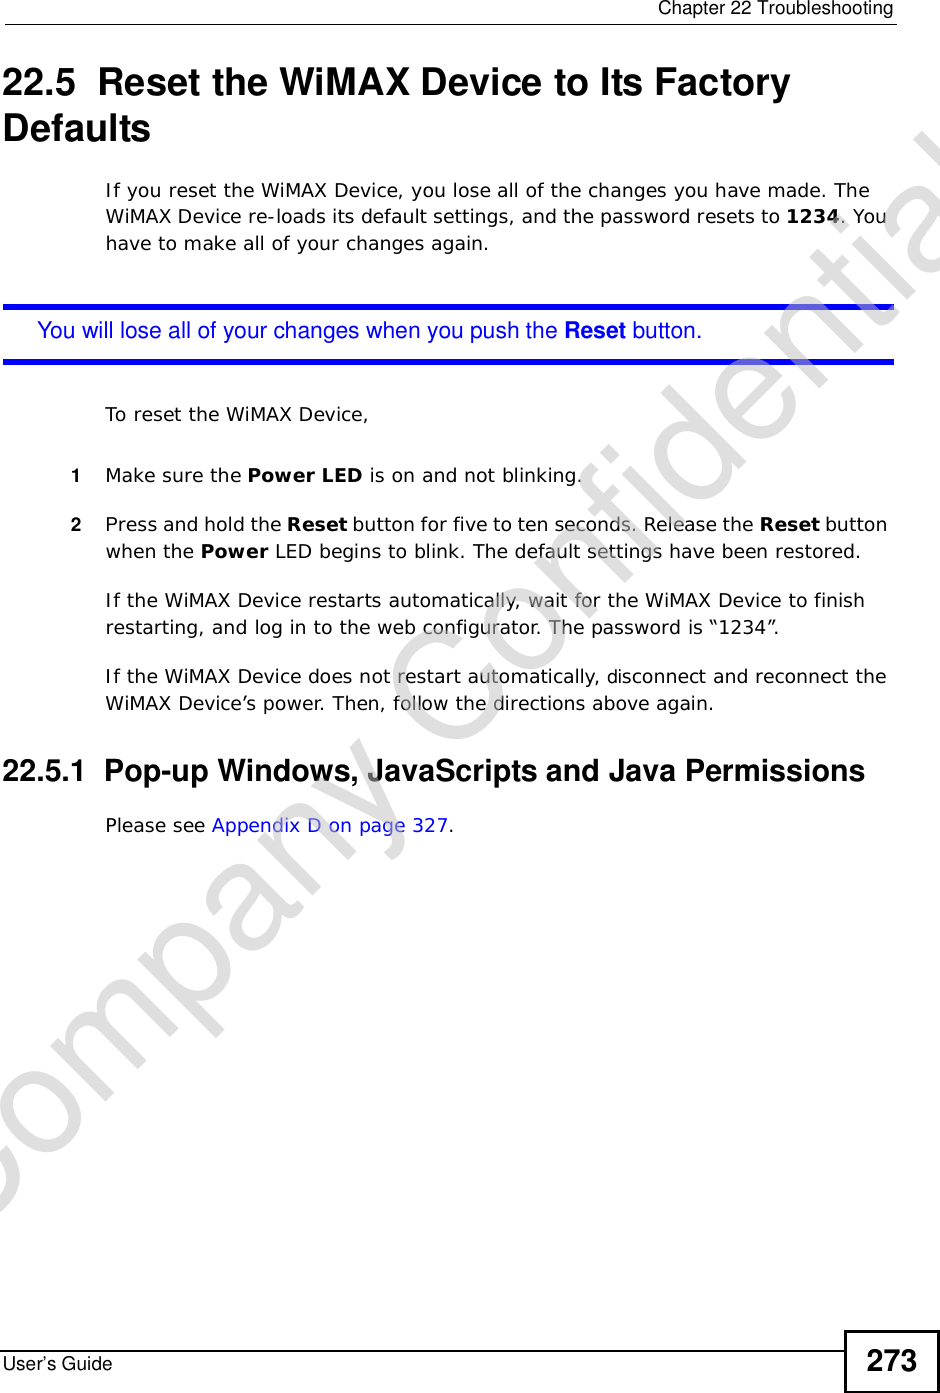  Chapter 22TroubleshootingUser’s Guide 27322.5  Reset the WiMAX Device to Its Factory DefaultsIf you reset the WiMAX Device, you lose all of the changes you have made. The WiMAX Device re-loads its default settings, and the password resets to 1234. You have to make all of your changes again.You will lose all of your changes when you push the Reset button.To reset the WiMAX Device,1Make sure the Power LED is on and not blinking.2Press and hold the Reset button for five to ten seconds. Release the Reset button when the Power LED begins to blink. The default settings have been restored.If the WiMAX Device restarts automatically, wait for the WiMAX Device to finish restarting, and log in to the web configurator. The password is “1234”.If the WiMAX Device does not restart automatically, disconnect and reconnect the WiMAX Device’s power. Then, follow the directions above again.22.5.1  Pop-up Windows, JavaScripts and Java PermissionsPlease see Appendix D on page 327.Company Confidential